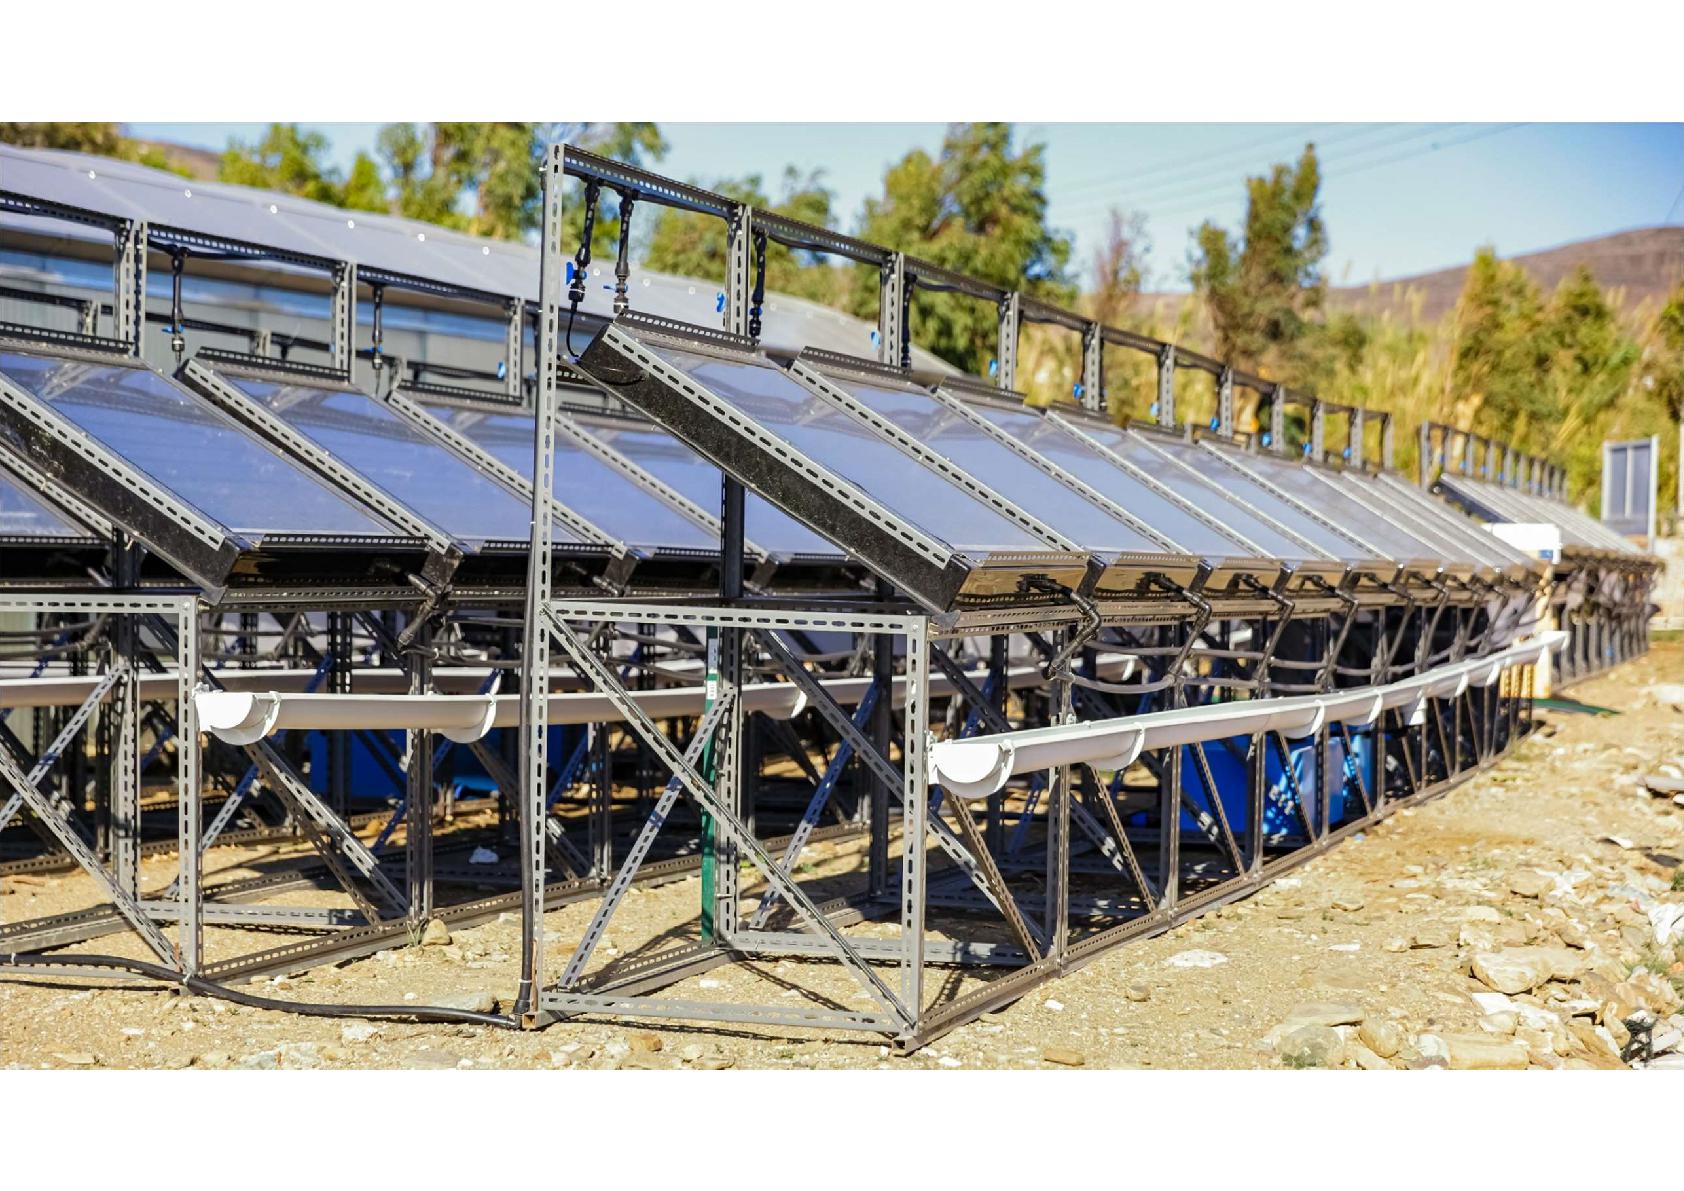 Real scale demosite in Tinos islands: 80 solar desalination units producing freshwater to water a tropical fruit and aloe greenhouse